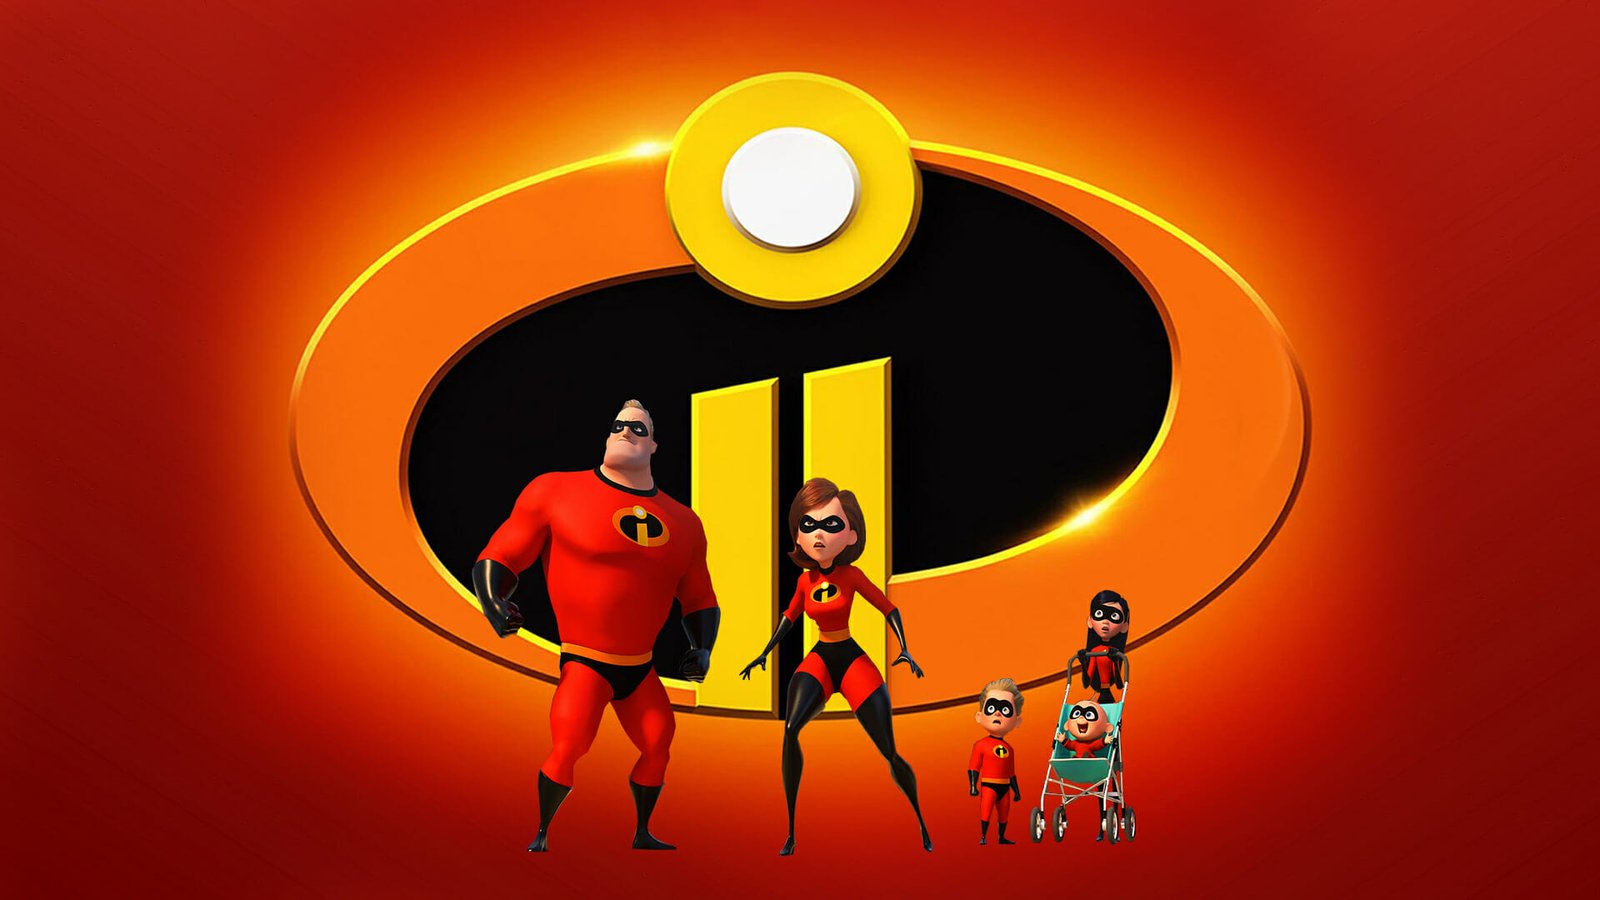 Netflix Animated Movies: The Incredibles 2